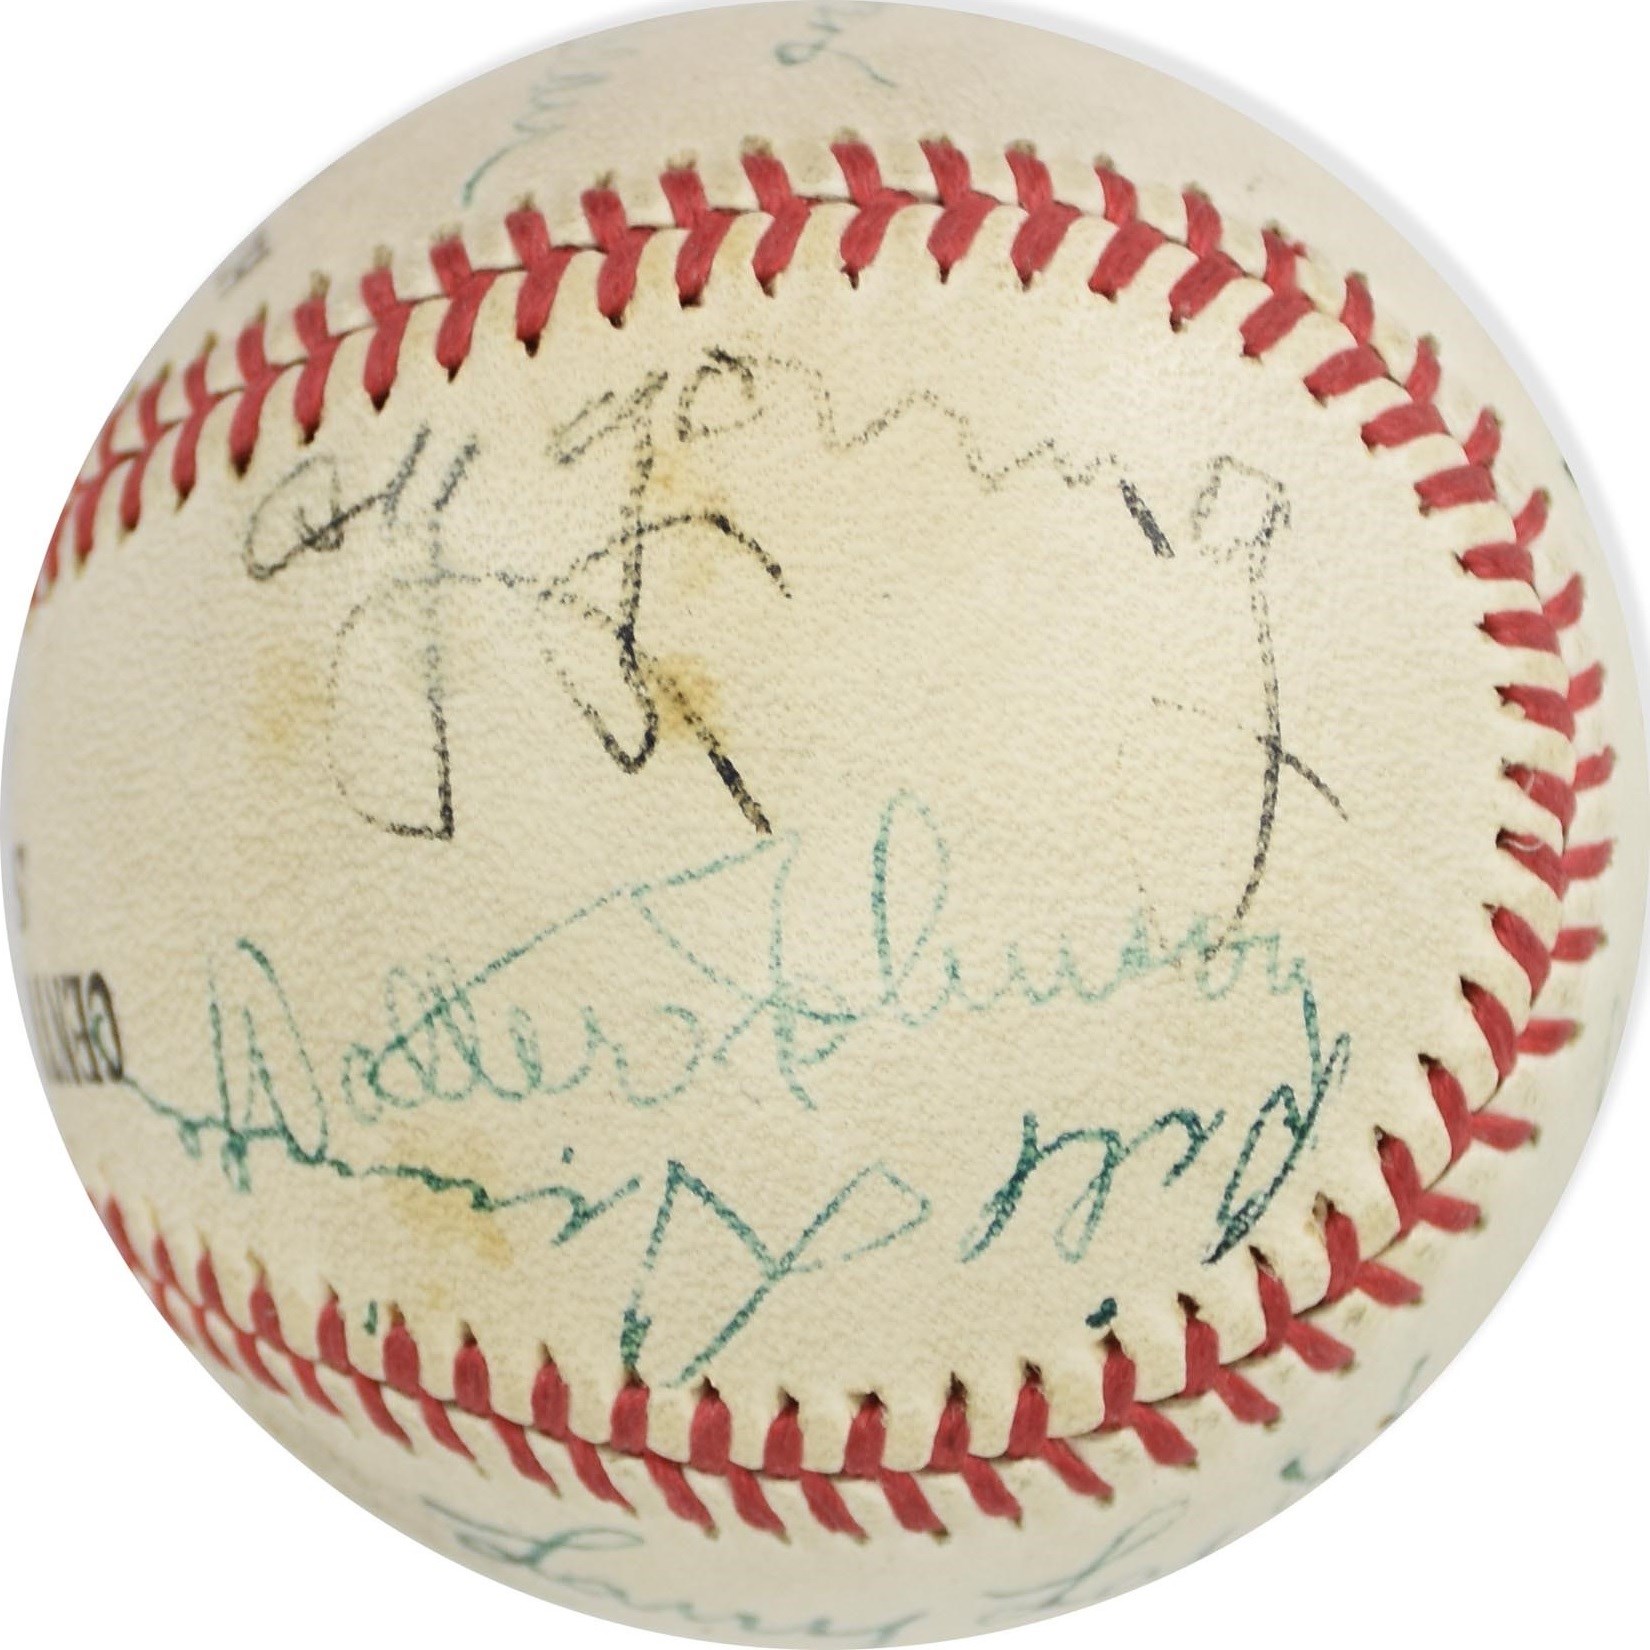 - Circa 1939 Hall of Famers Signed Baseball with Five Original Inductees and Johnny Evers (PSA)